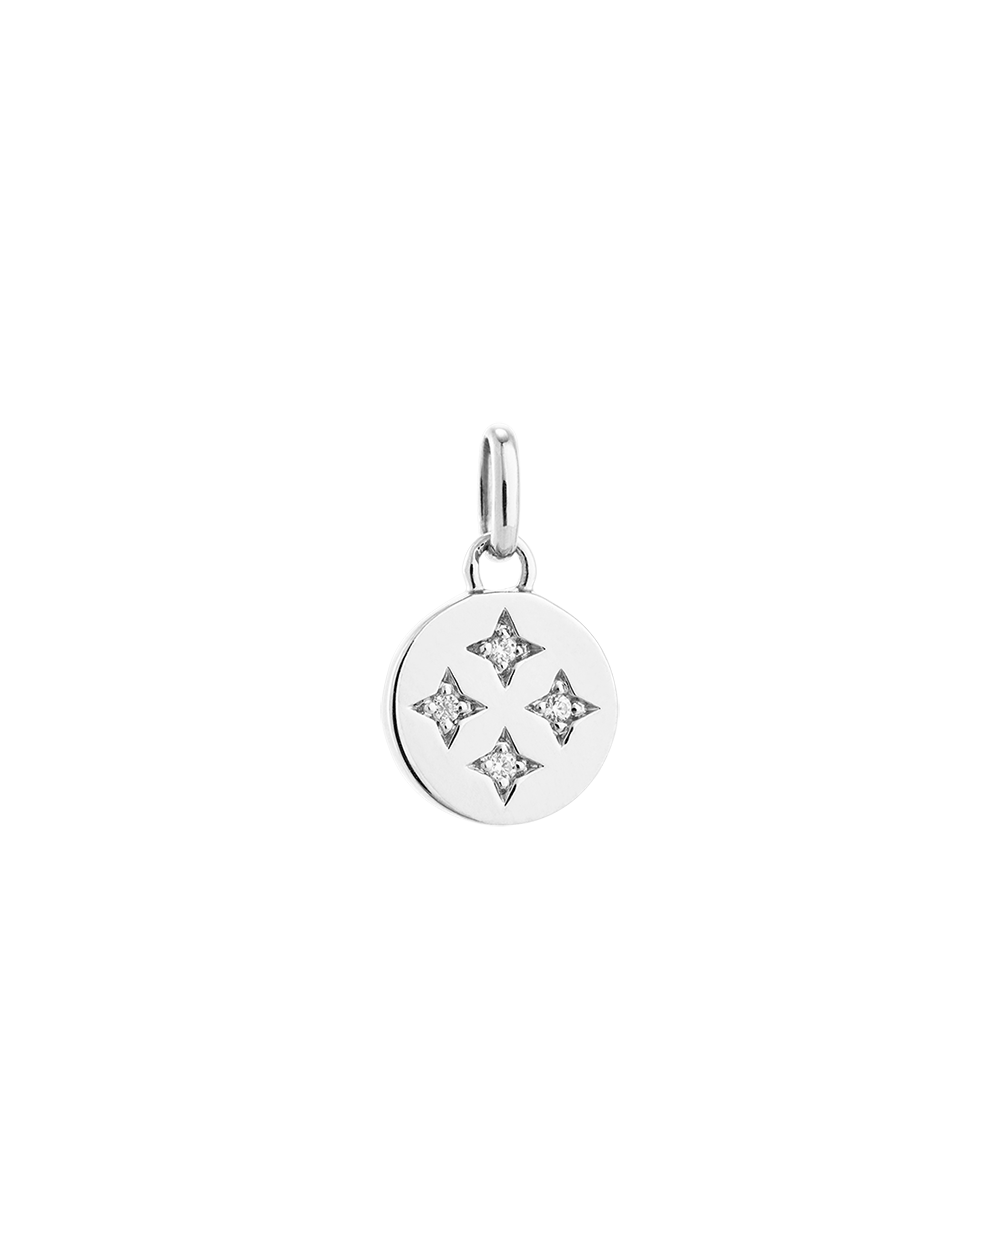 TINY CONSTELLATION CHARM (STERLING SILVER) - IMAGE 1